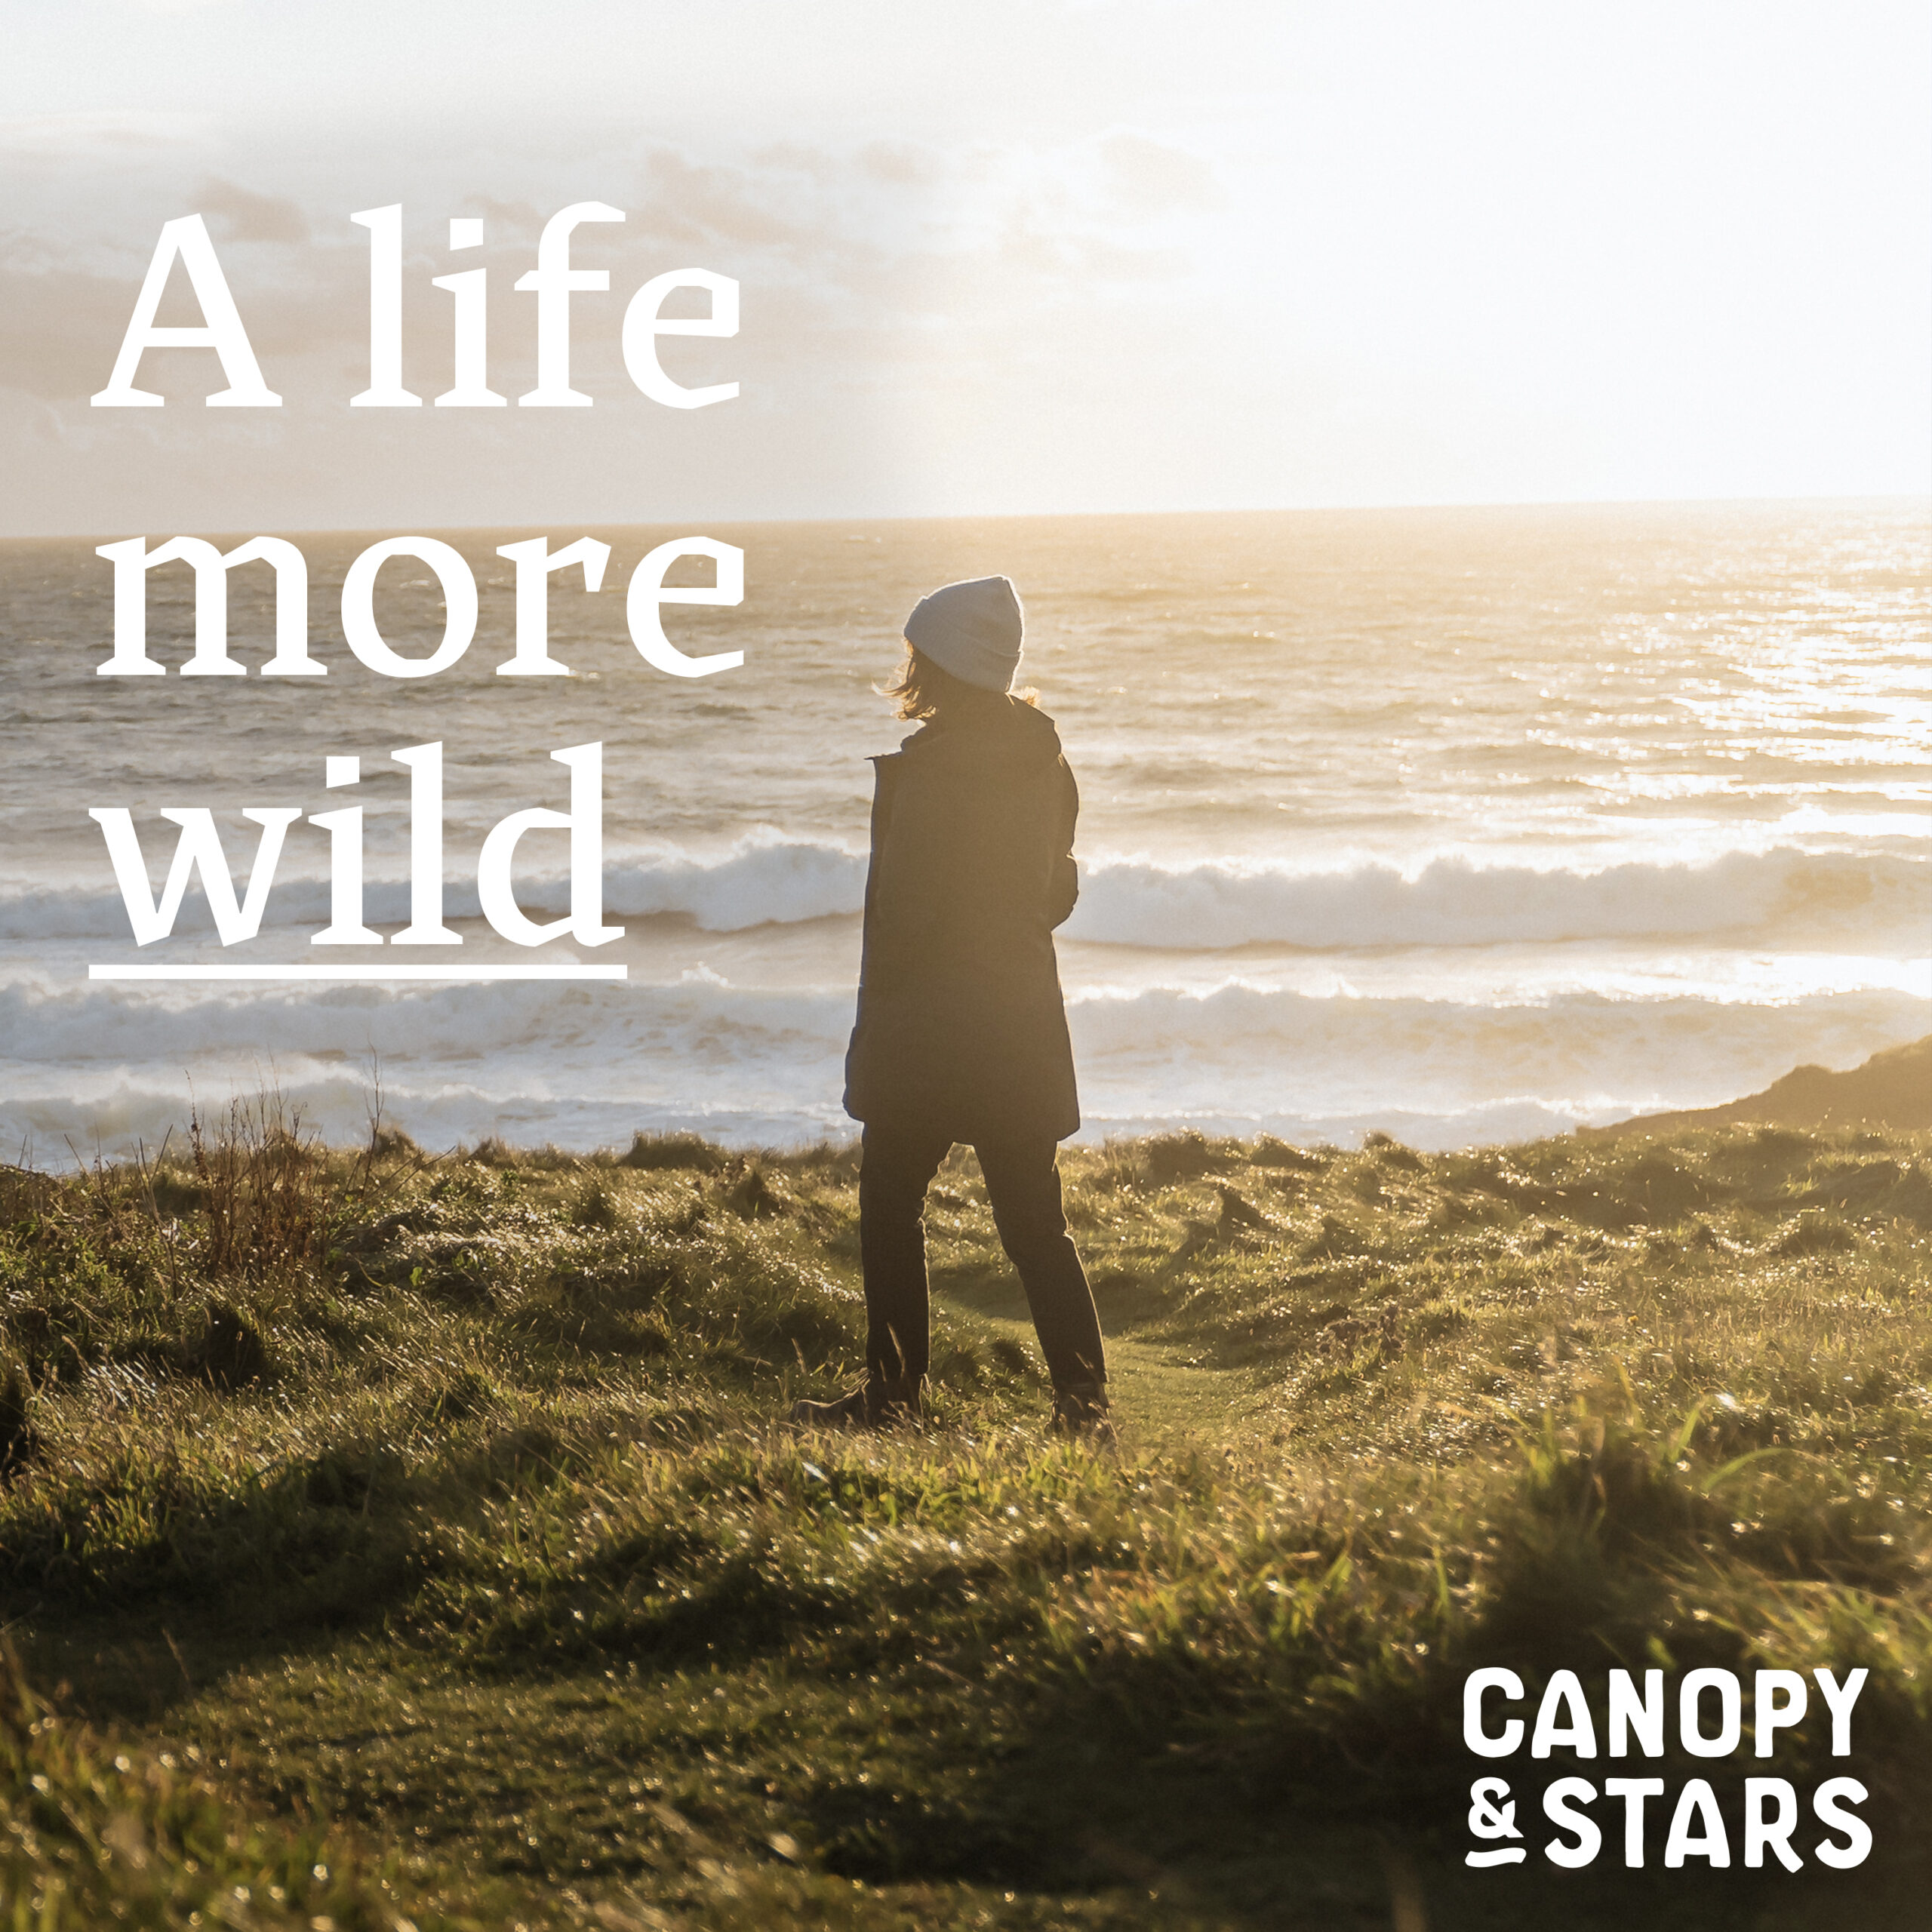 A life More Wild podcast artwork - a person stands looking out to see from a cliff top